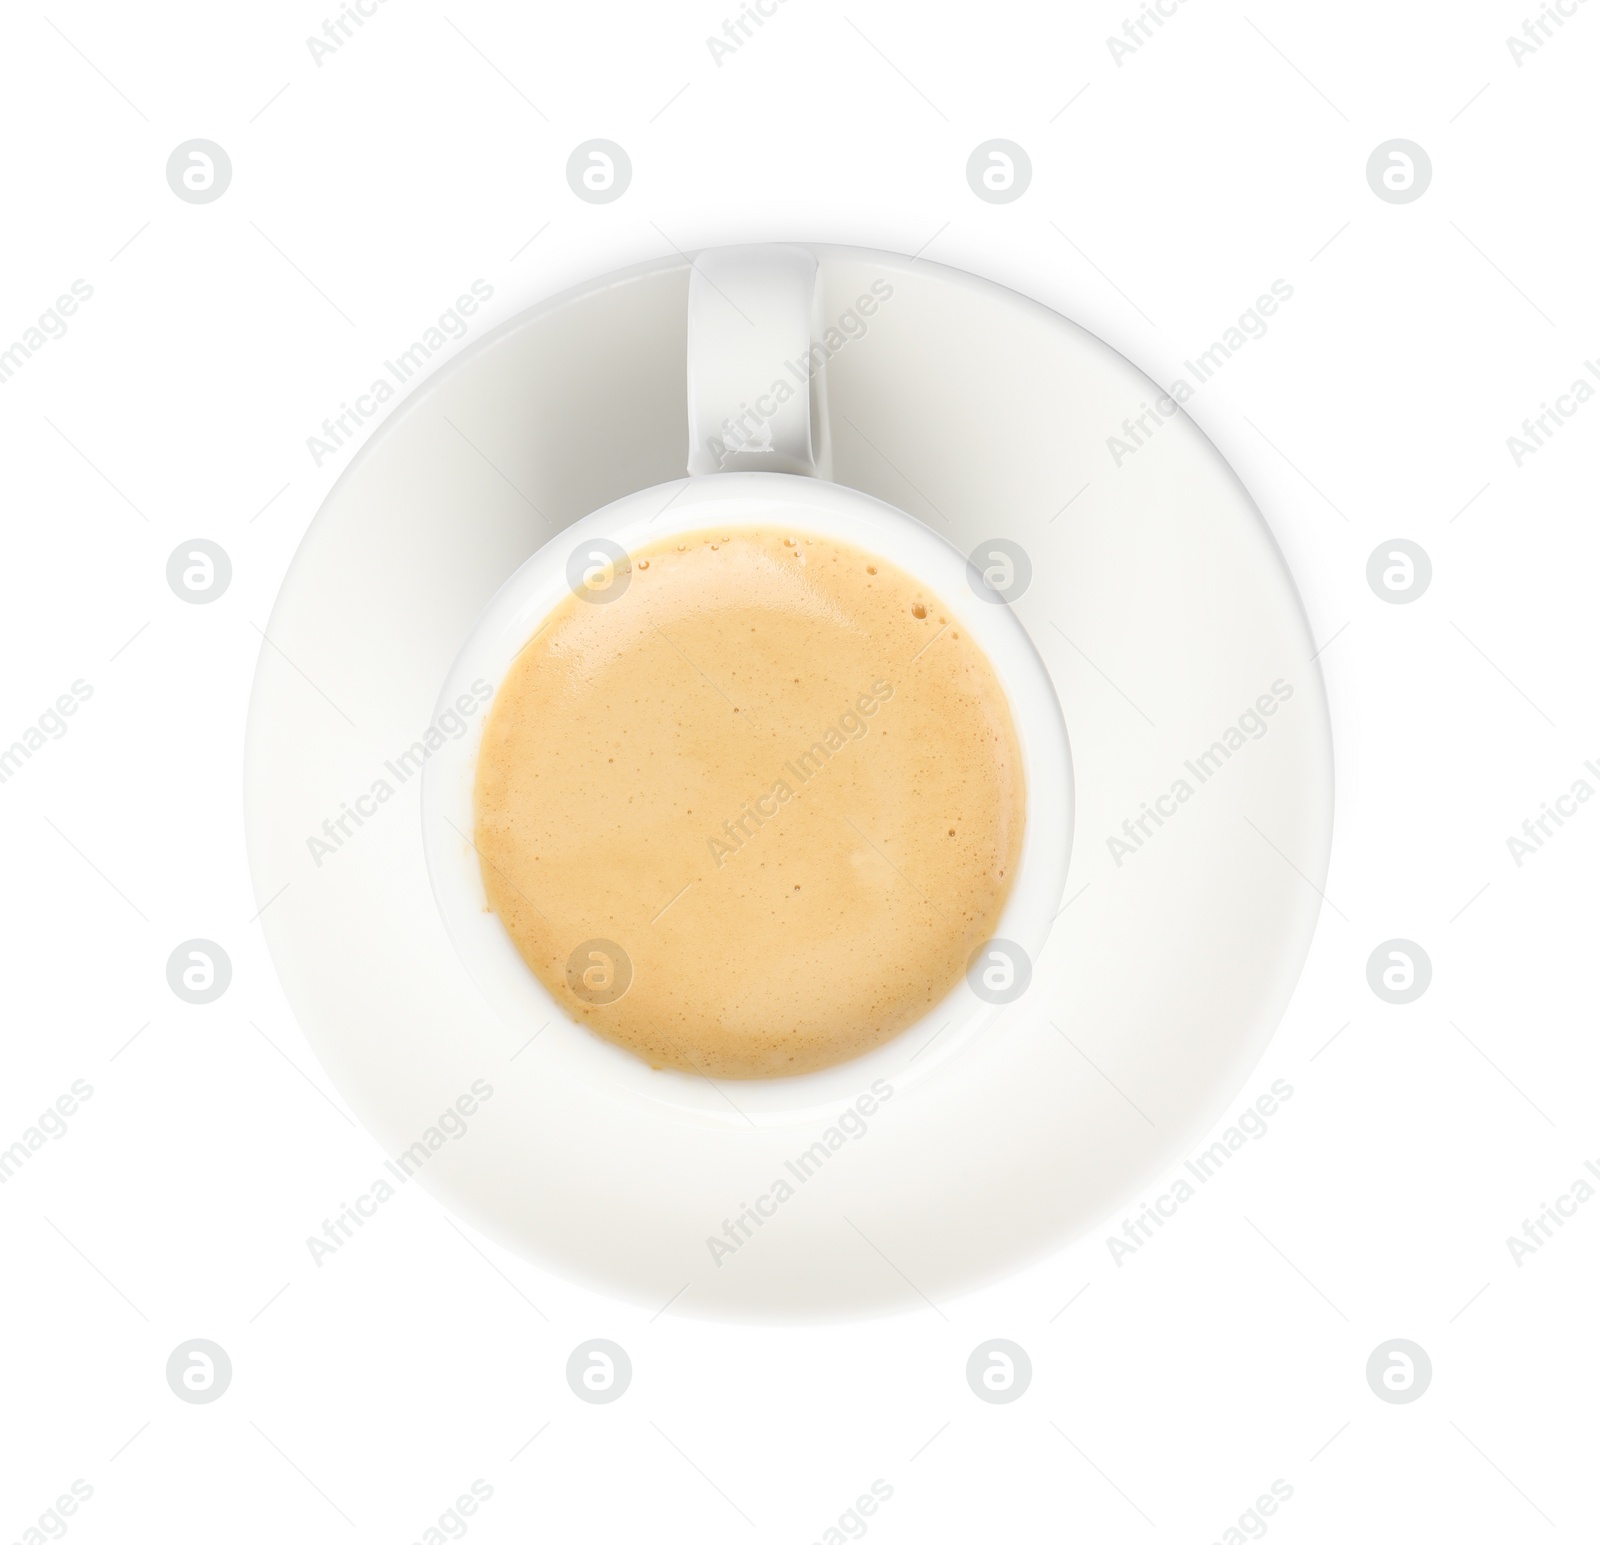 Photo of Aromatic coffee in cup isolated on white, top view